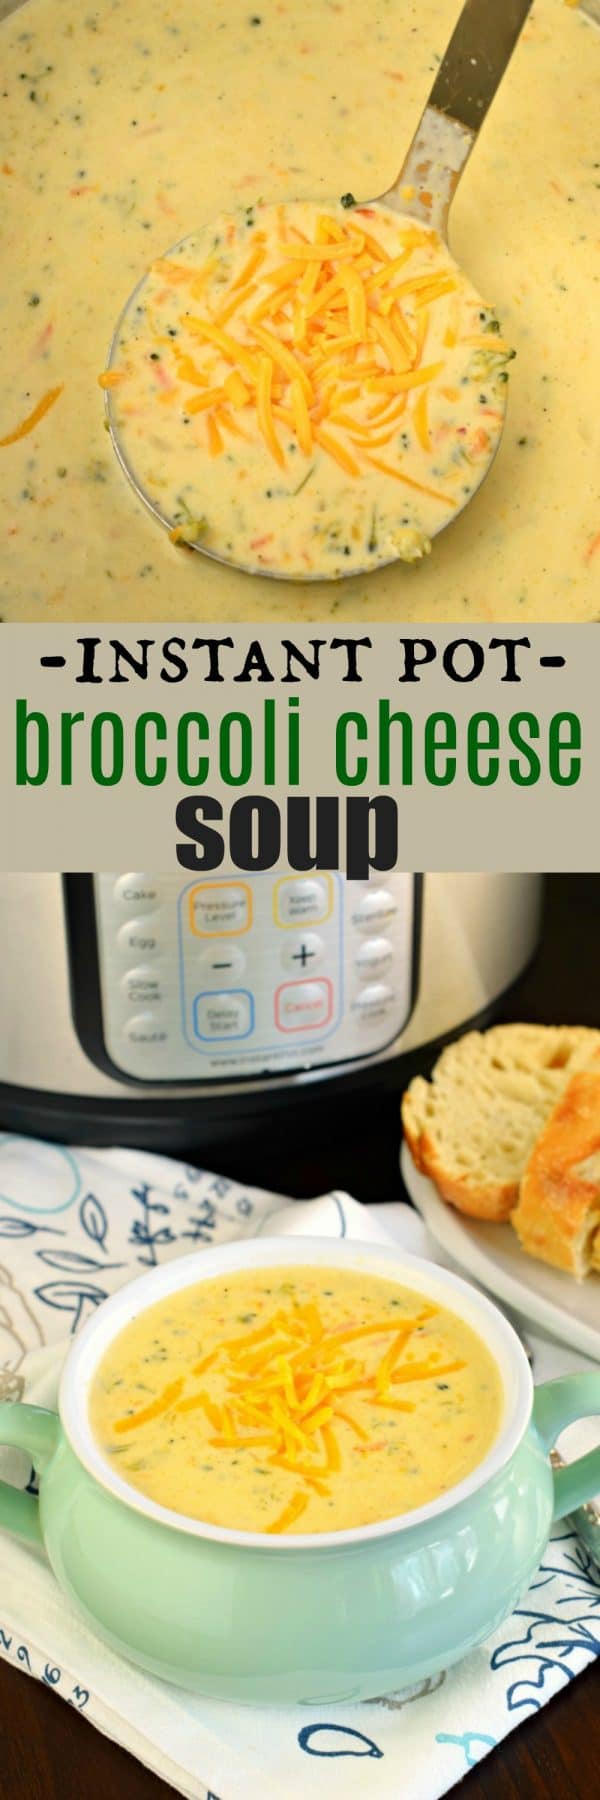 Copycat Panera Broccoli Cheddar Soup made in the instant pot #20minutes #pressurecooker #broccolicheese #soup